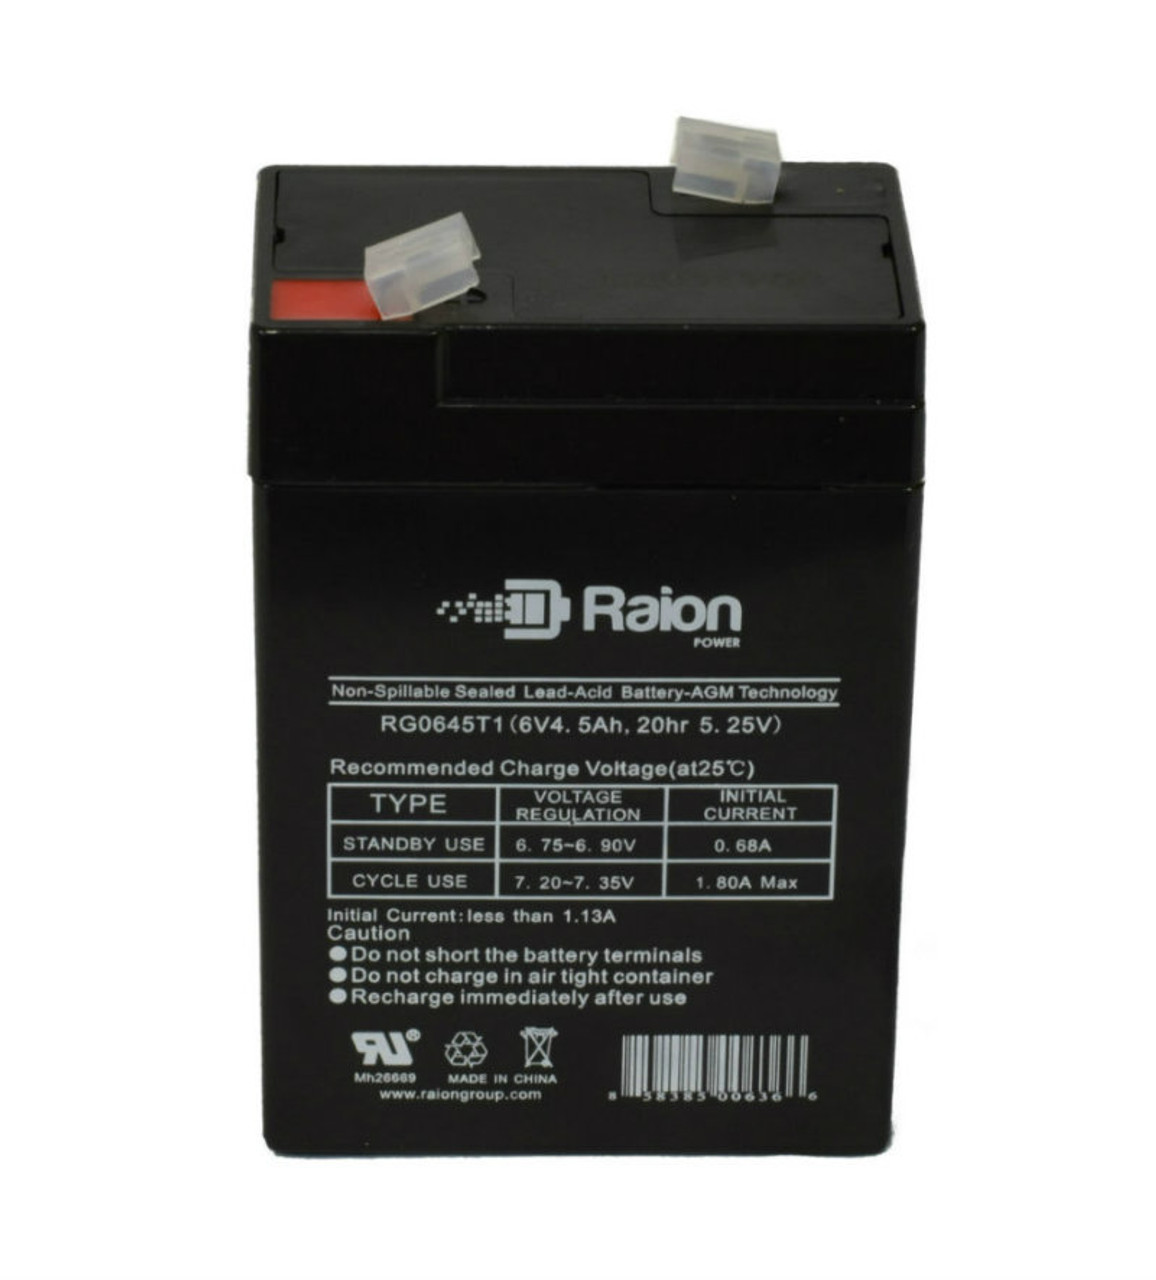 Raion Power RG0645T1 Replacement Battery Cartridge for Vision CP656